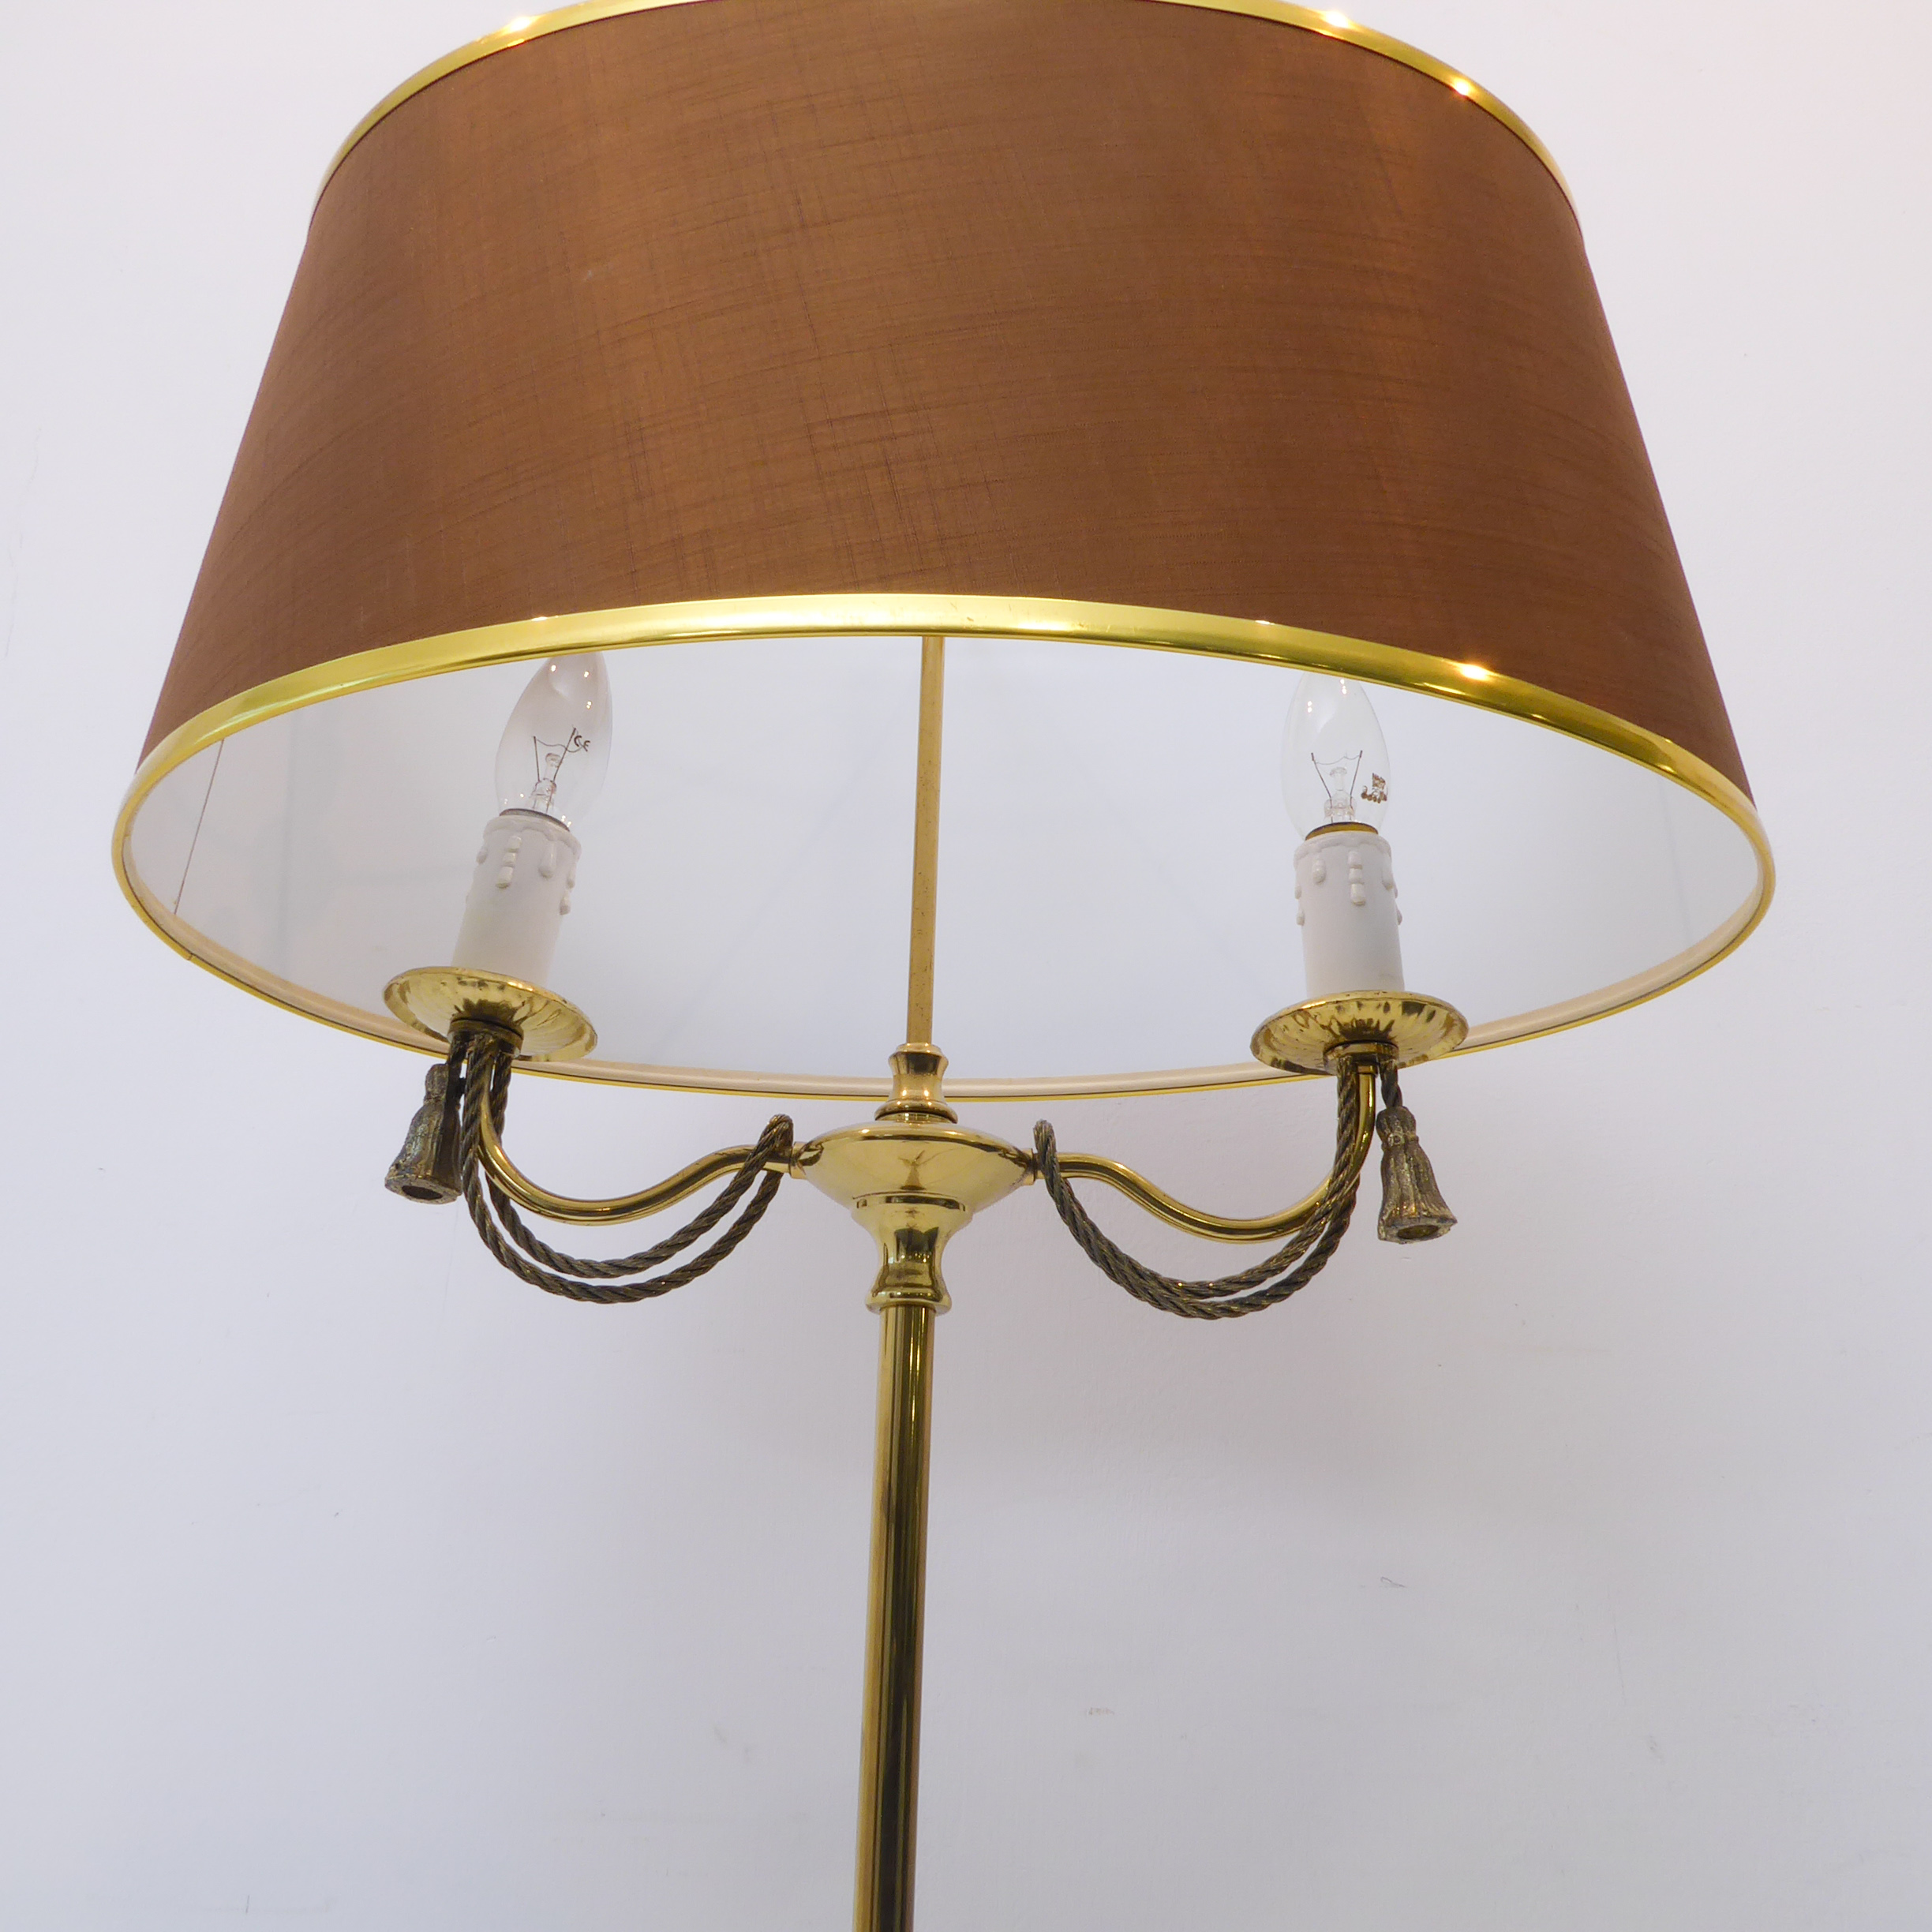 A brass lamp-standard with oval brown shade: two lights with rope-effect decoration and on tripod - Image 2 of 4